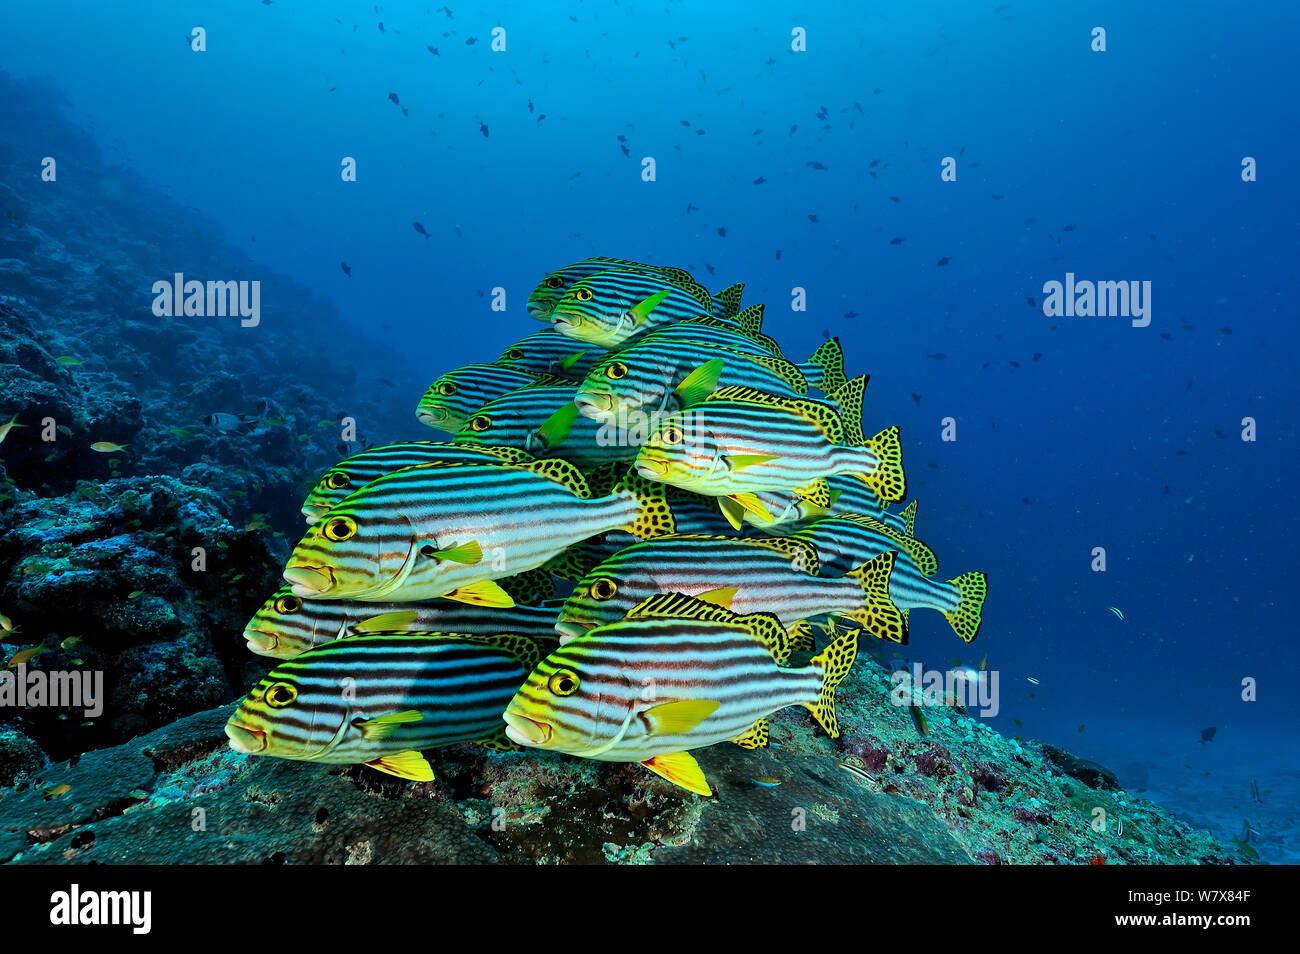 School of Oriental sweetlips (Plectorhinchus orientalis) at a cleaning station, Maldives. Indian Ocean. Stock Photo